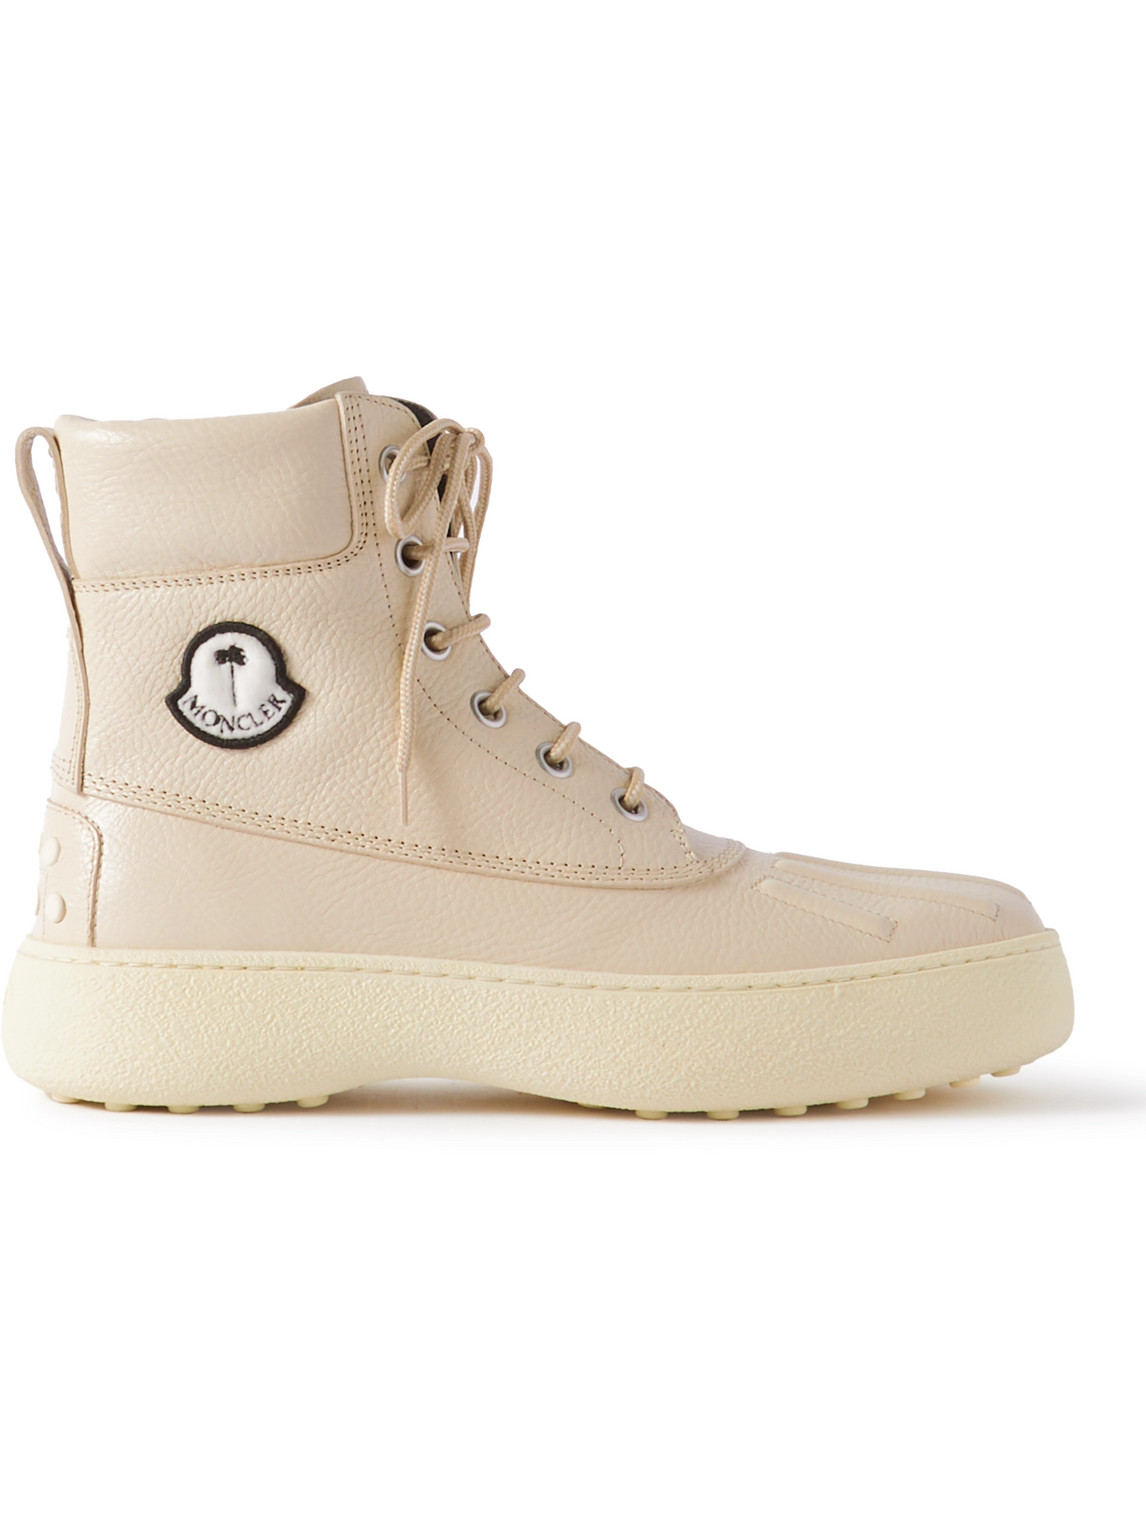 Moncler Genius Tod's Palm Angels Winter Gommino Full-grain Leather Boots In White